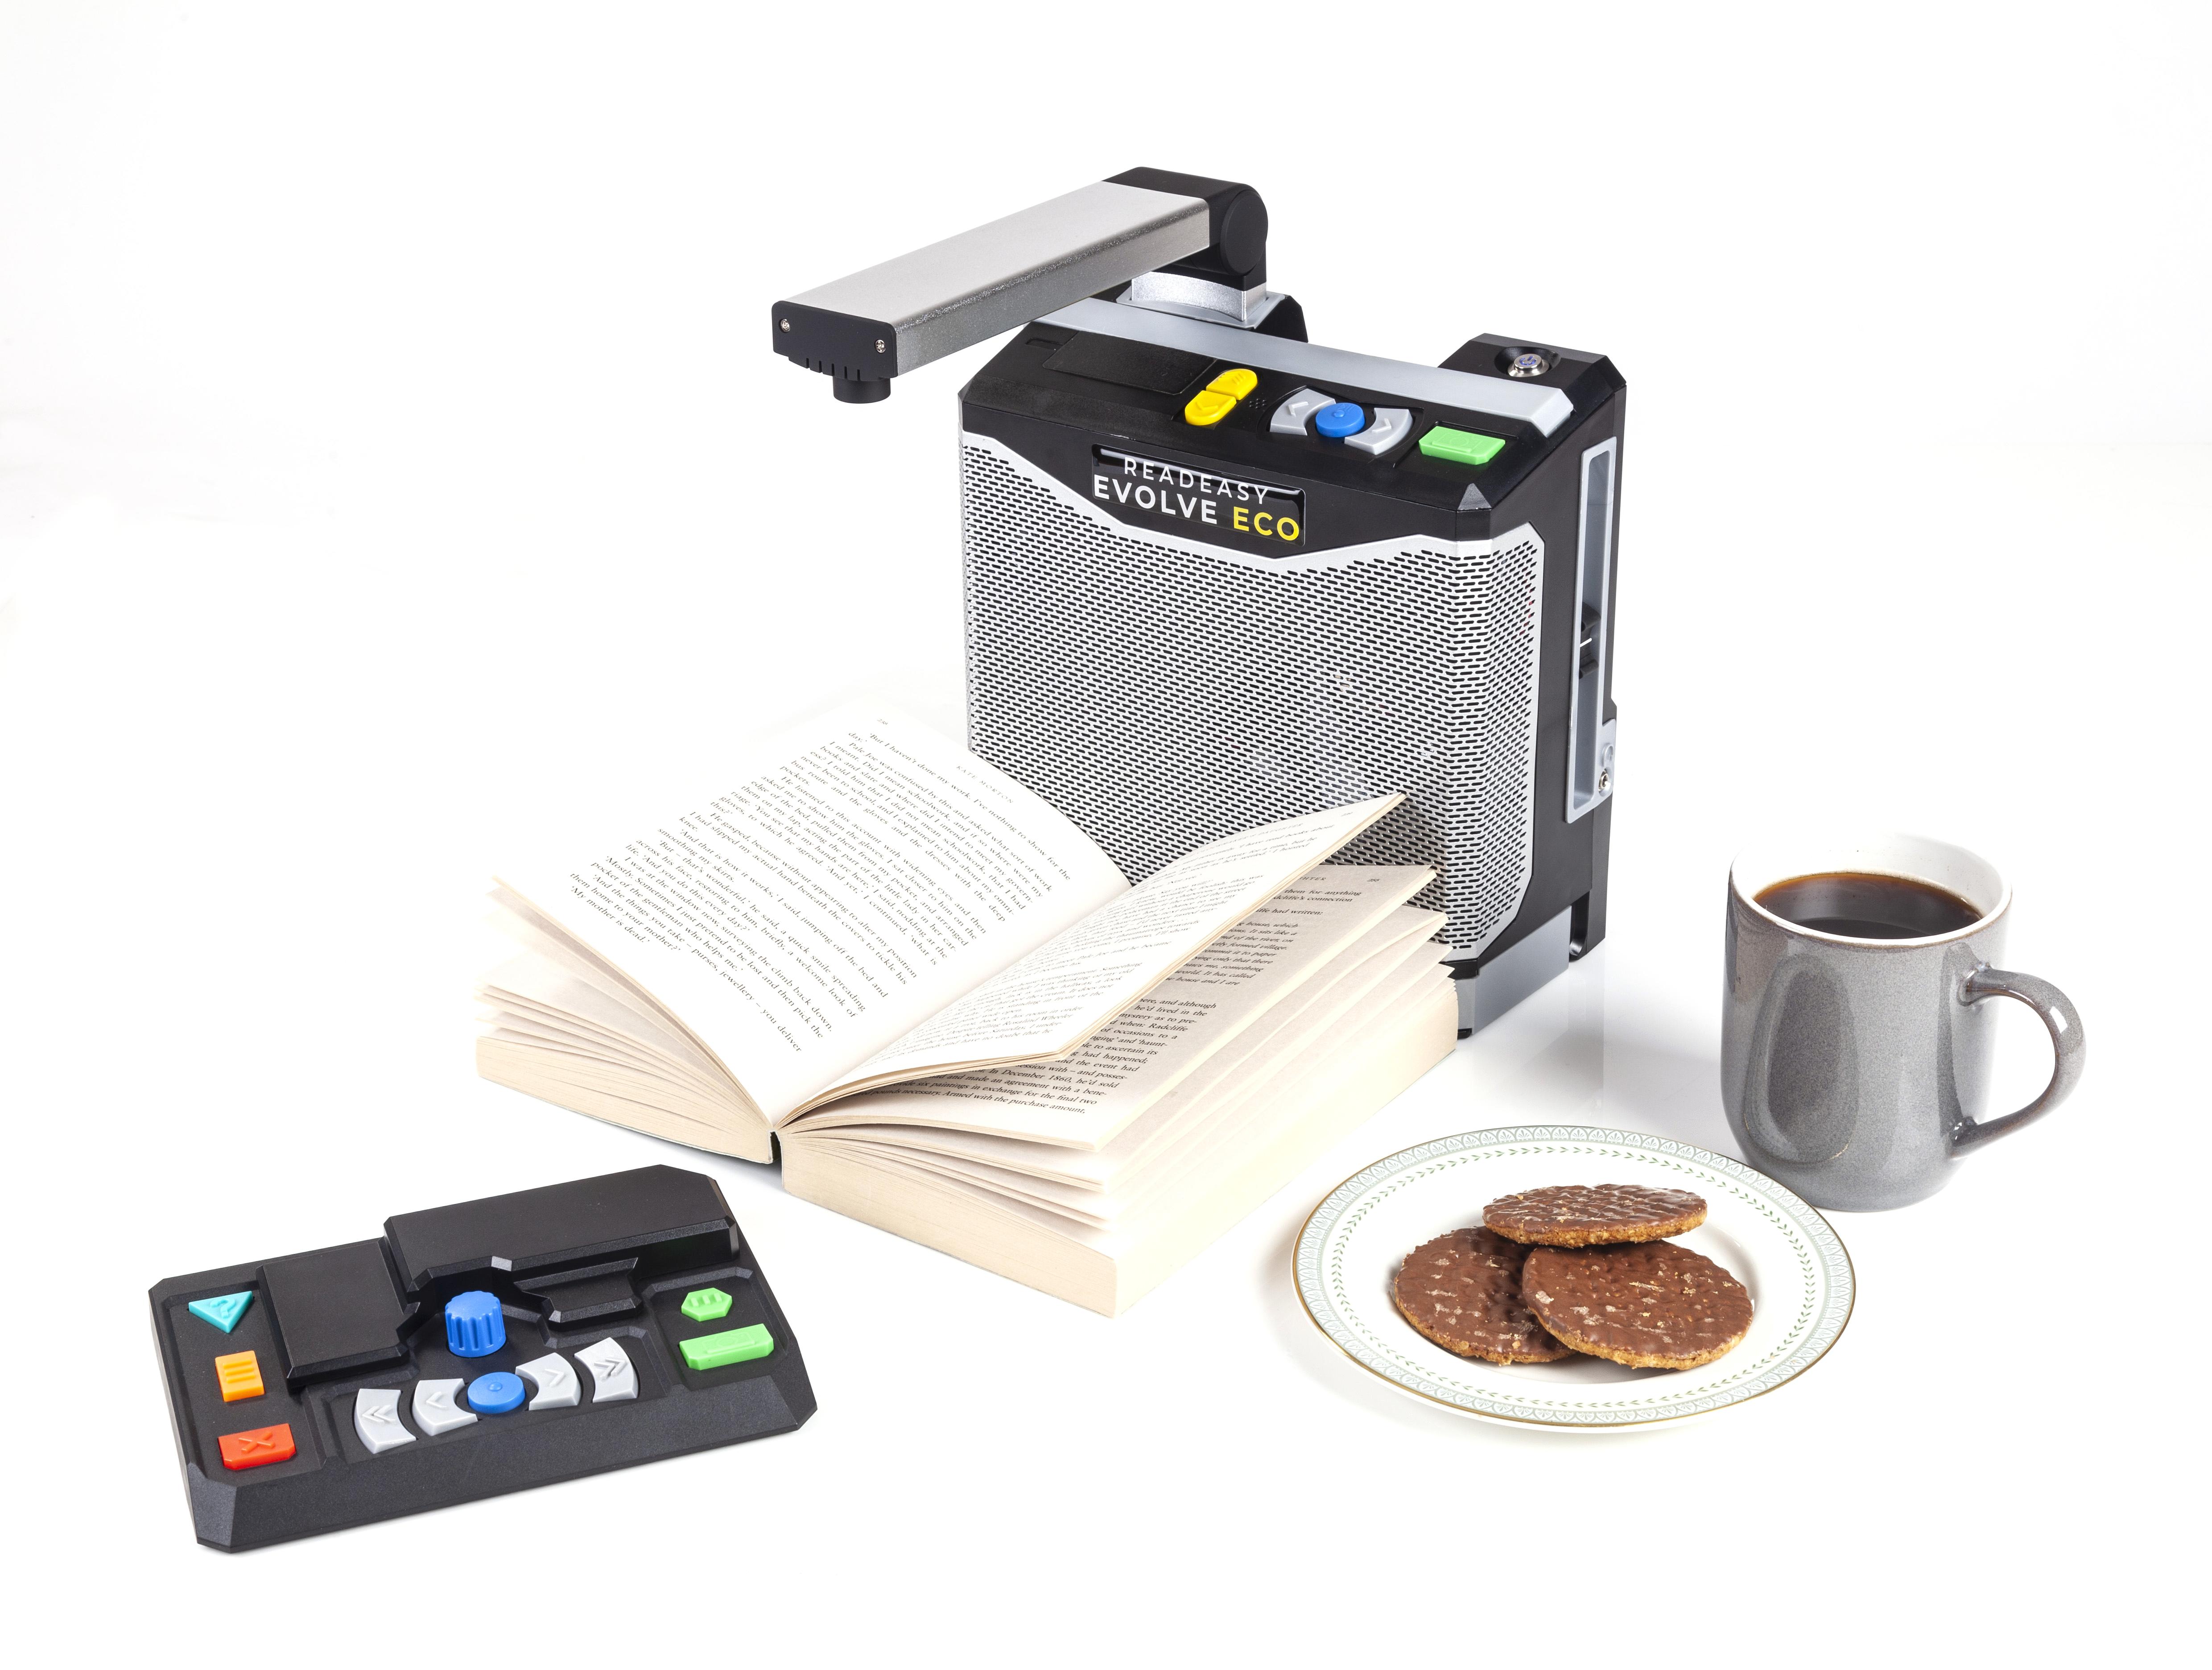 ReadEasy Evolve ECO capturing a book in front of the book is the optional feature pack. To the right of the ReadEasy evolve eco is a grey mug of black coffee a plate with 3 chocolate covered digestive biscuits